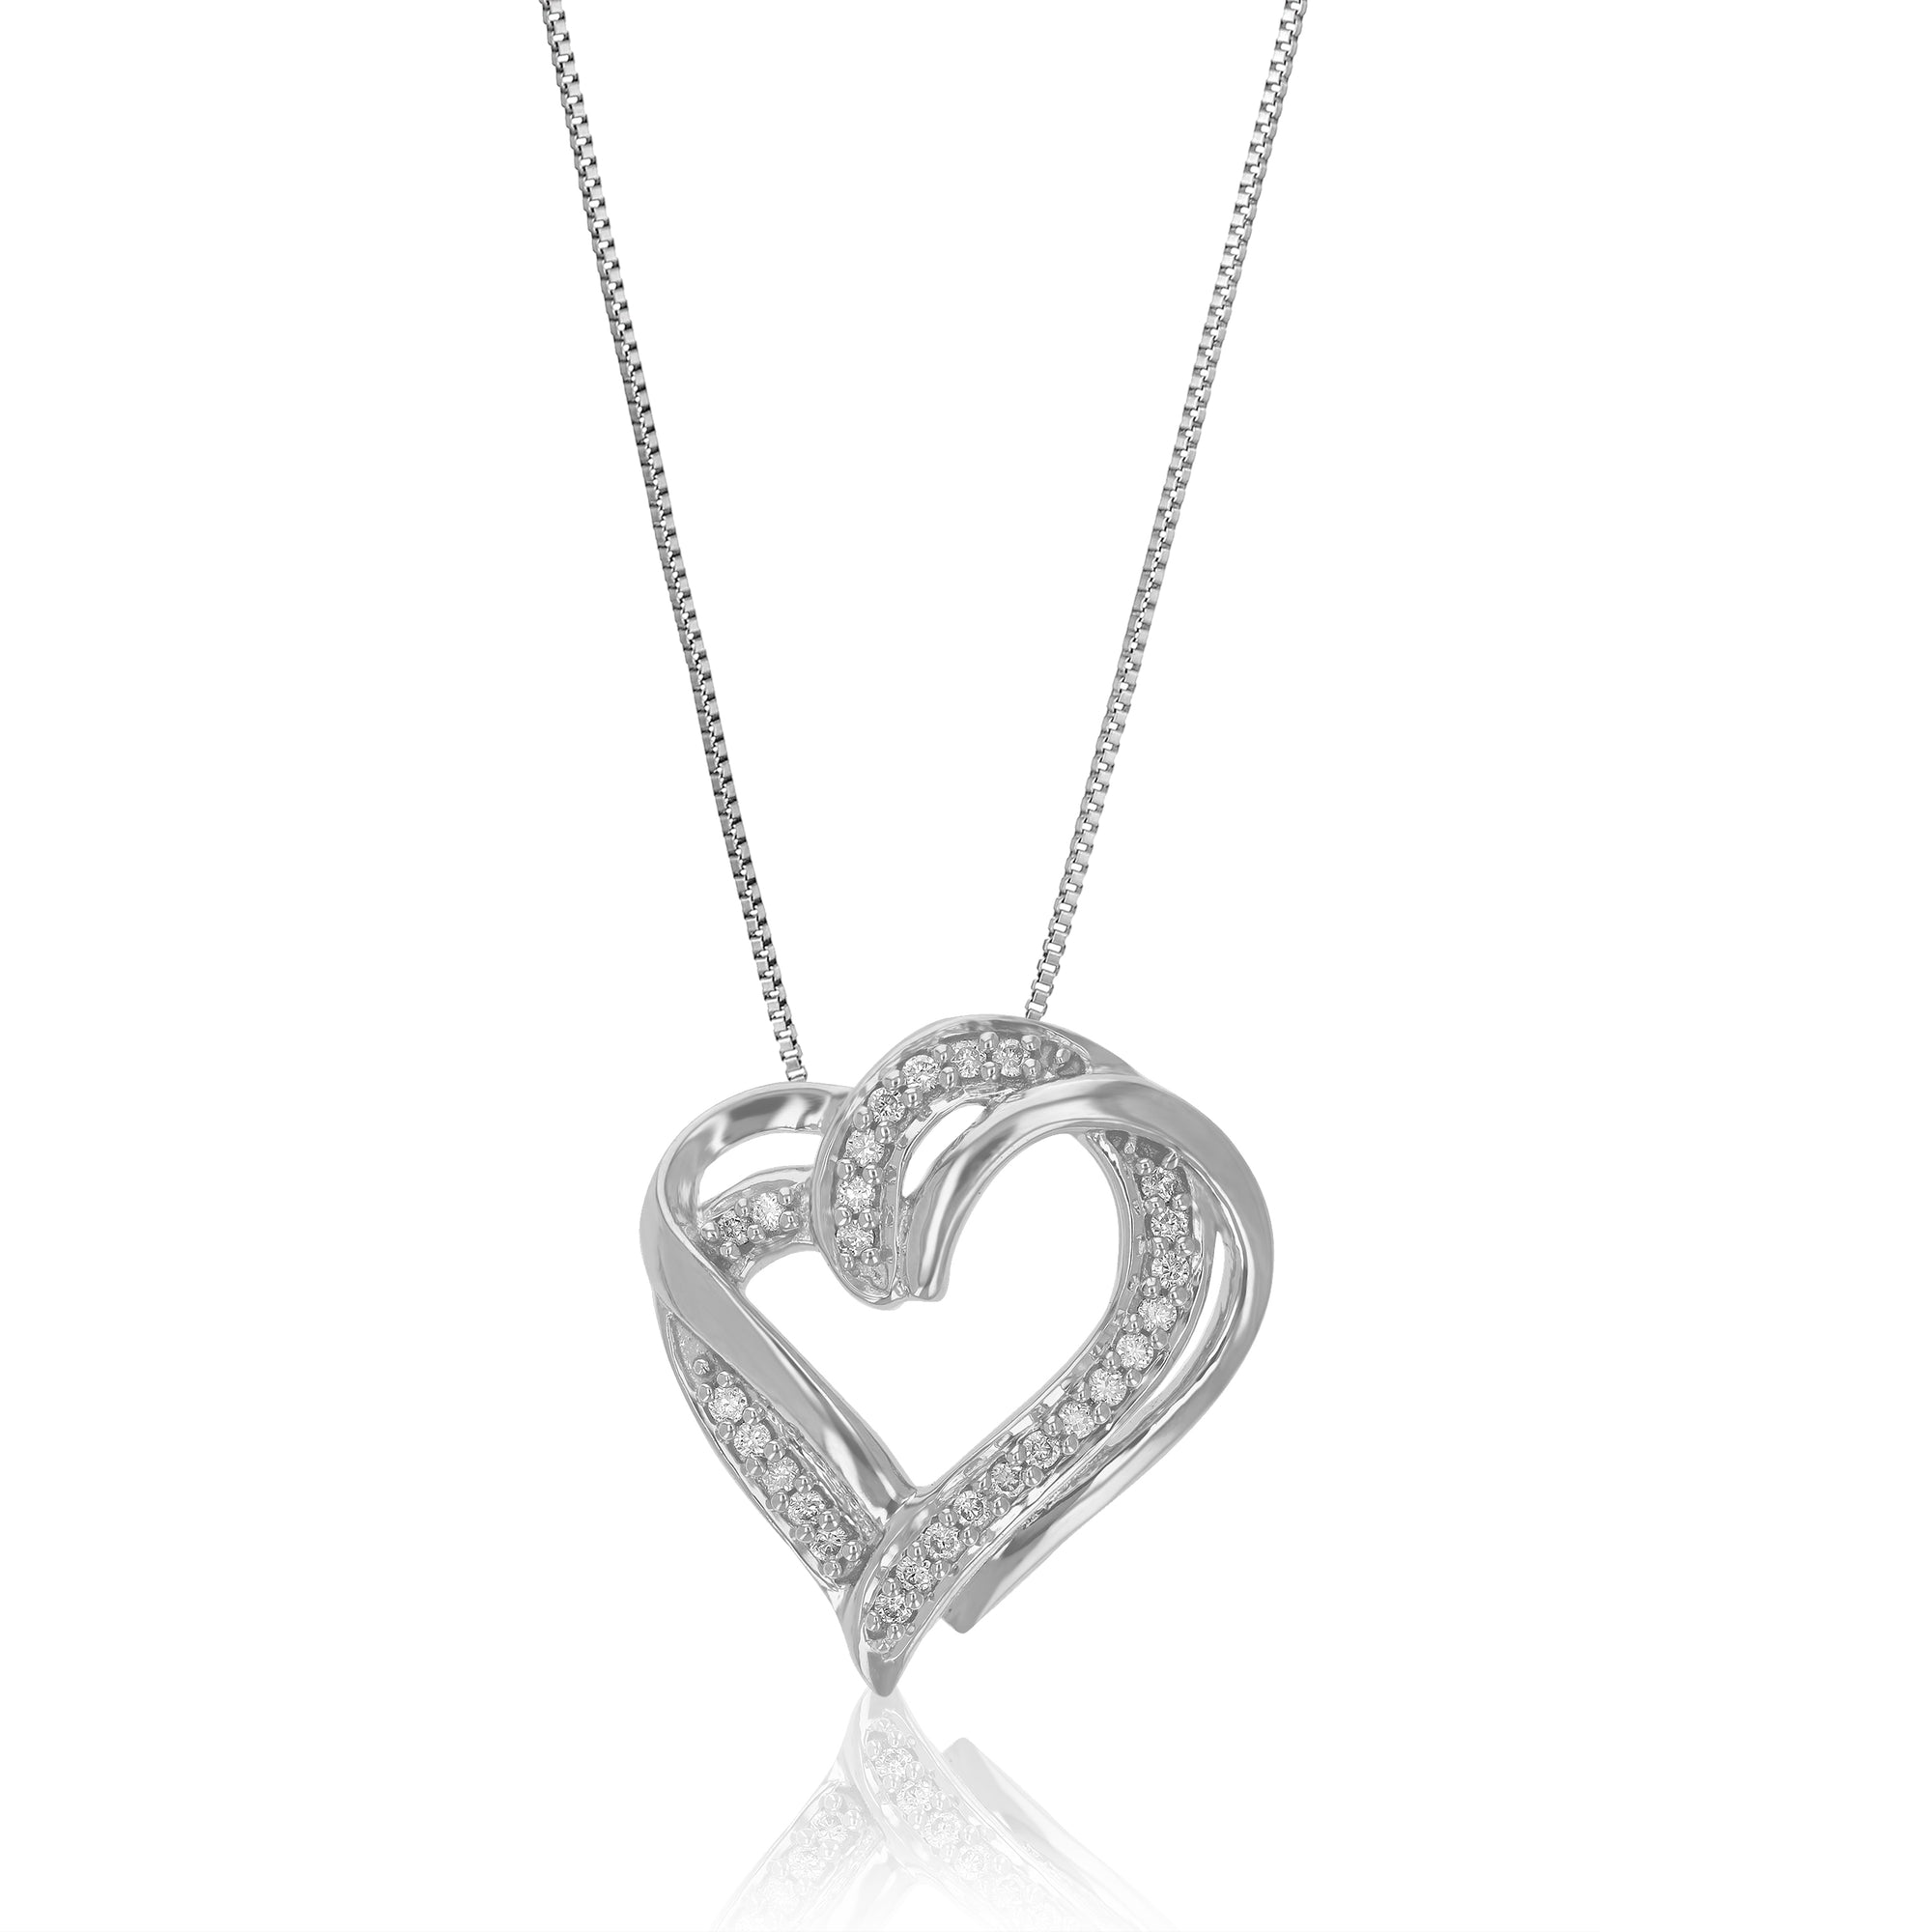 1/10 cttw Diamond Pendant Necklace for Women, Lab Grown Diamond Heart Pendant Necklace in .925 Sterling Silver with Chain, Size 2/3 Inch